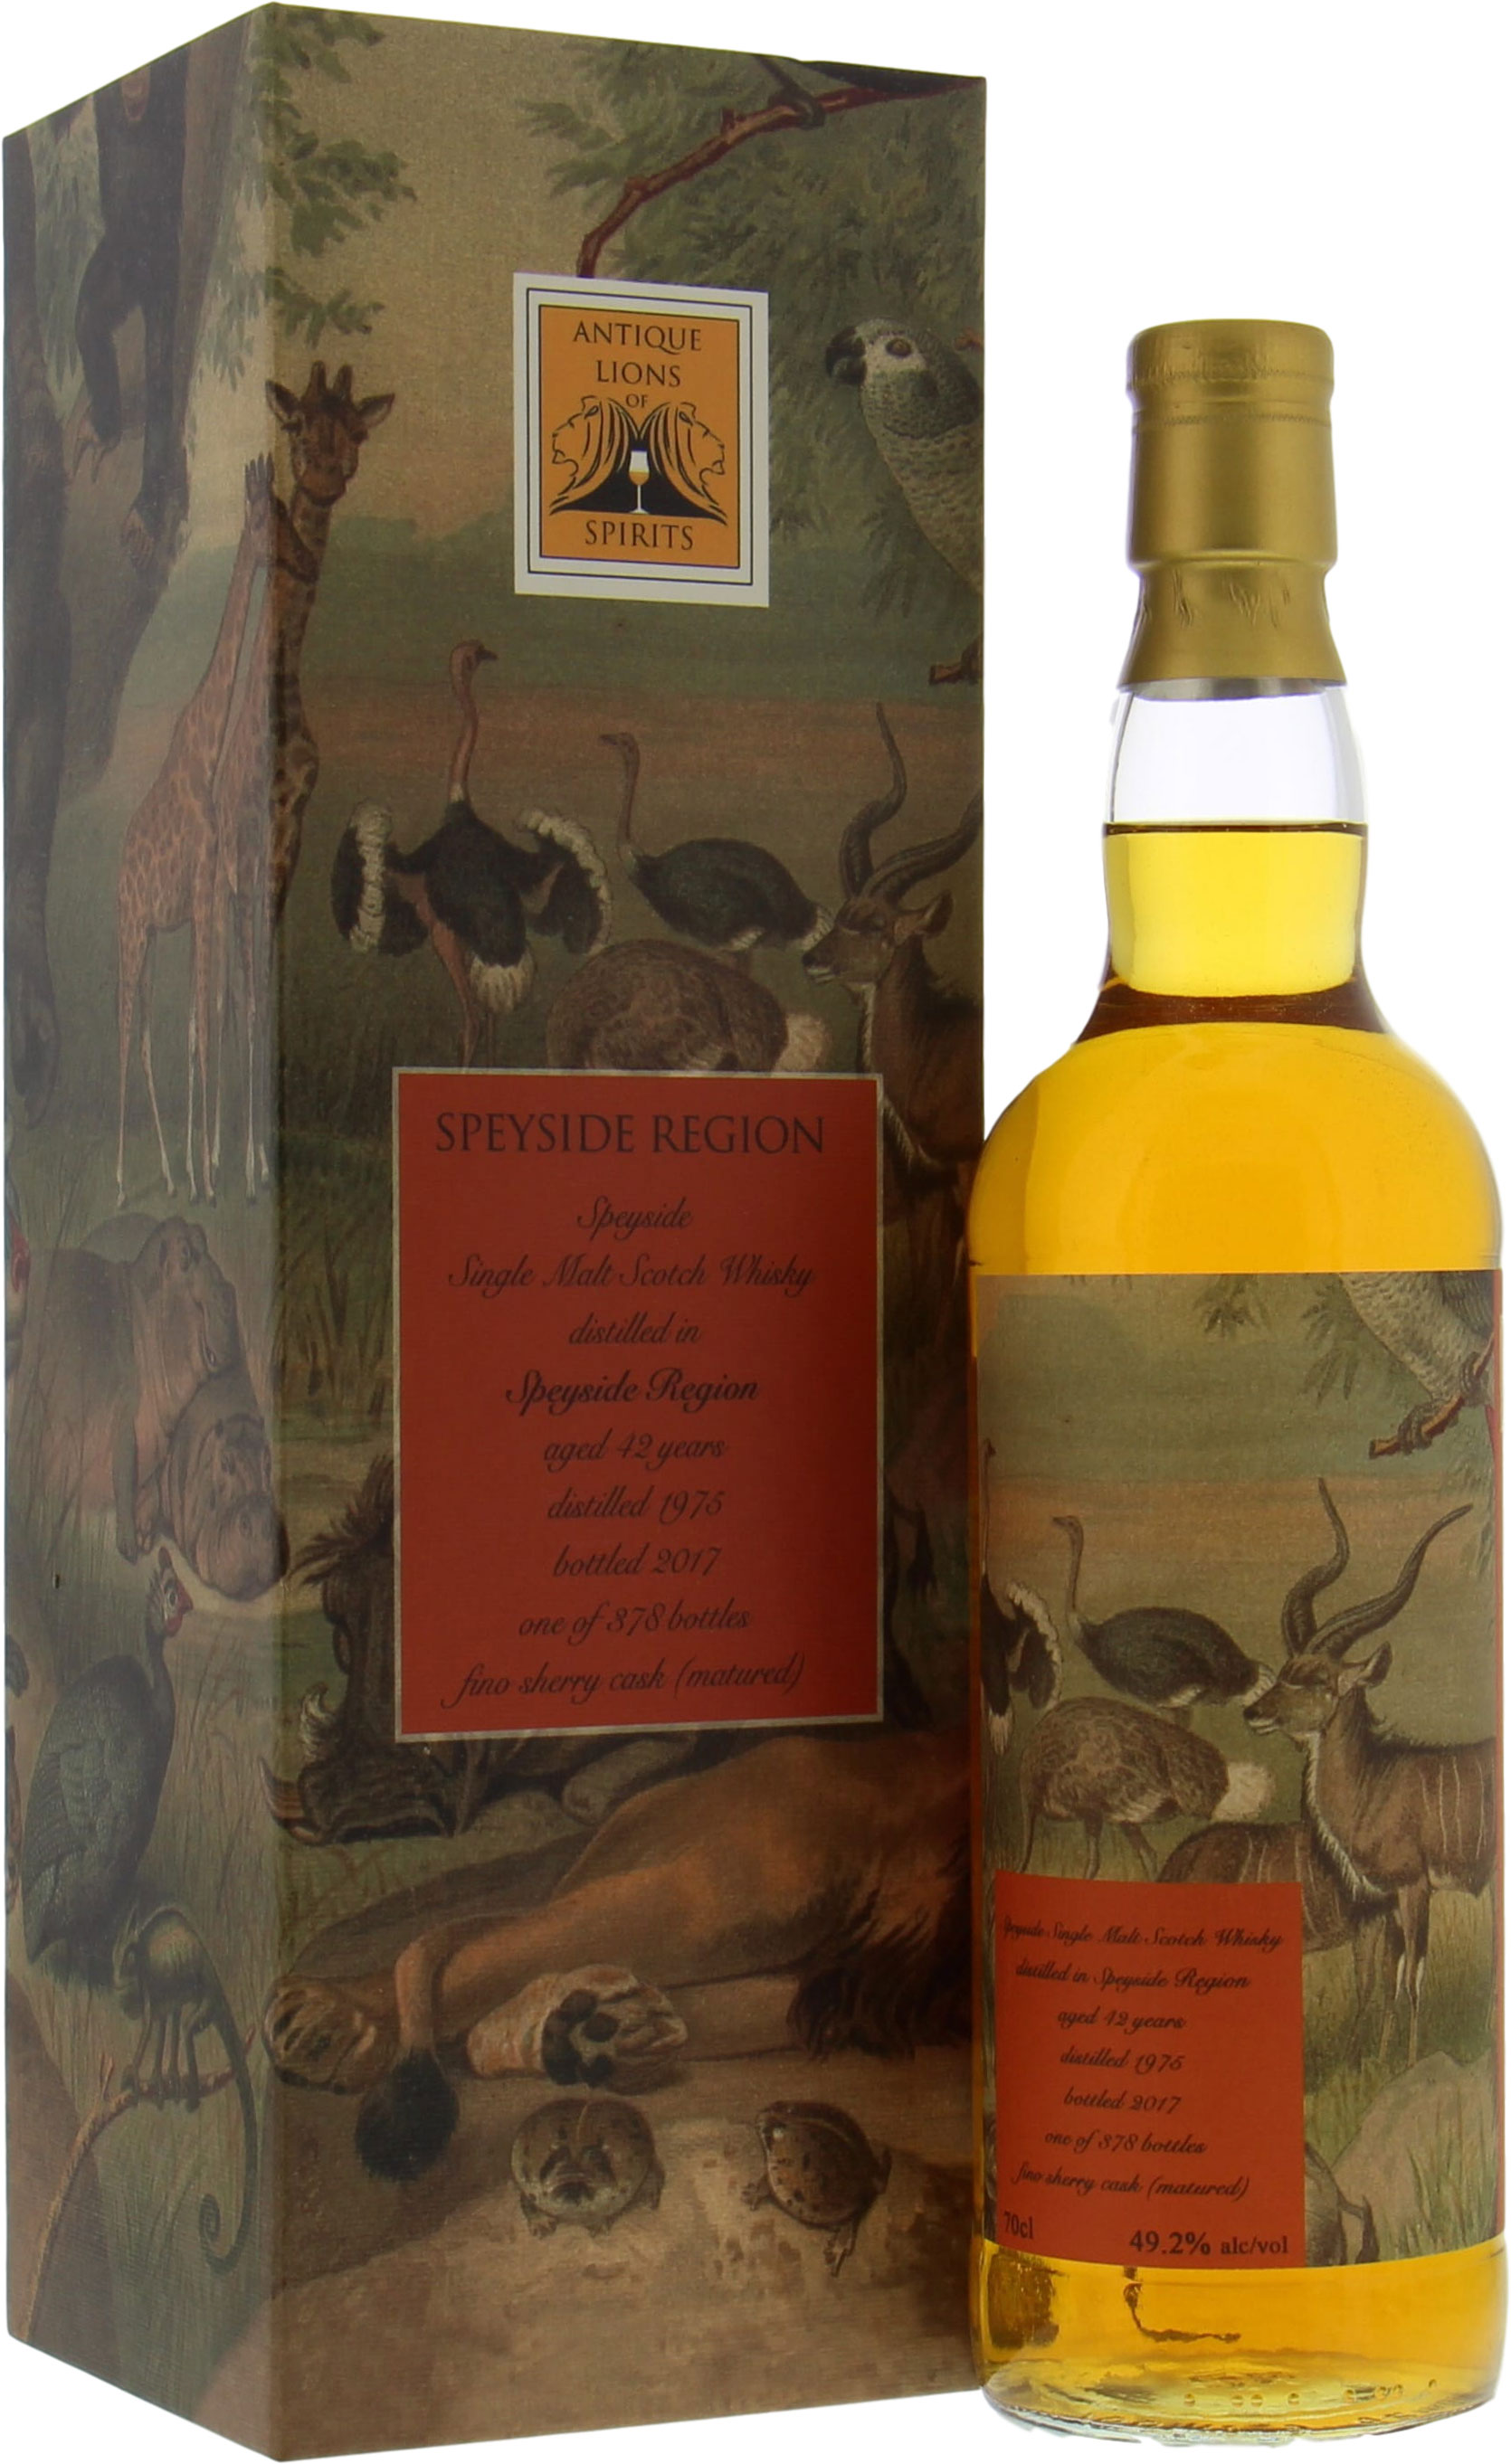 Speyside Region - 42 Years Old Antique Lions of Spirits Savannah Series 49.2% 1975 In Original Container